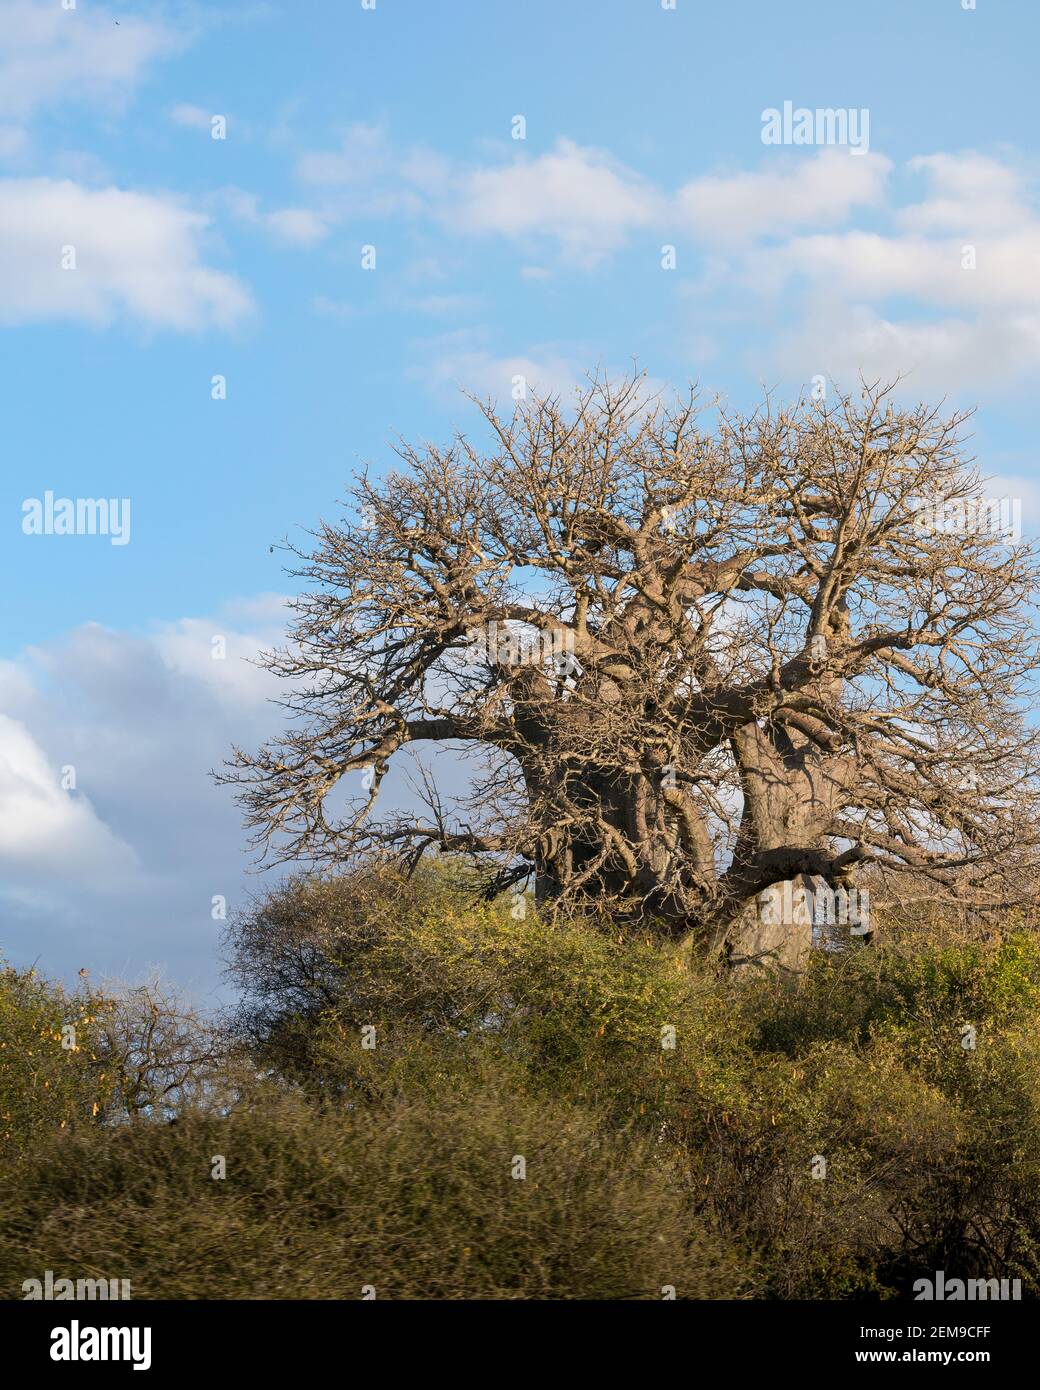 Baobab tree (Adansonia) with blue sky and clouds. Arusha, Tanzania. Africa. Stock Photo